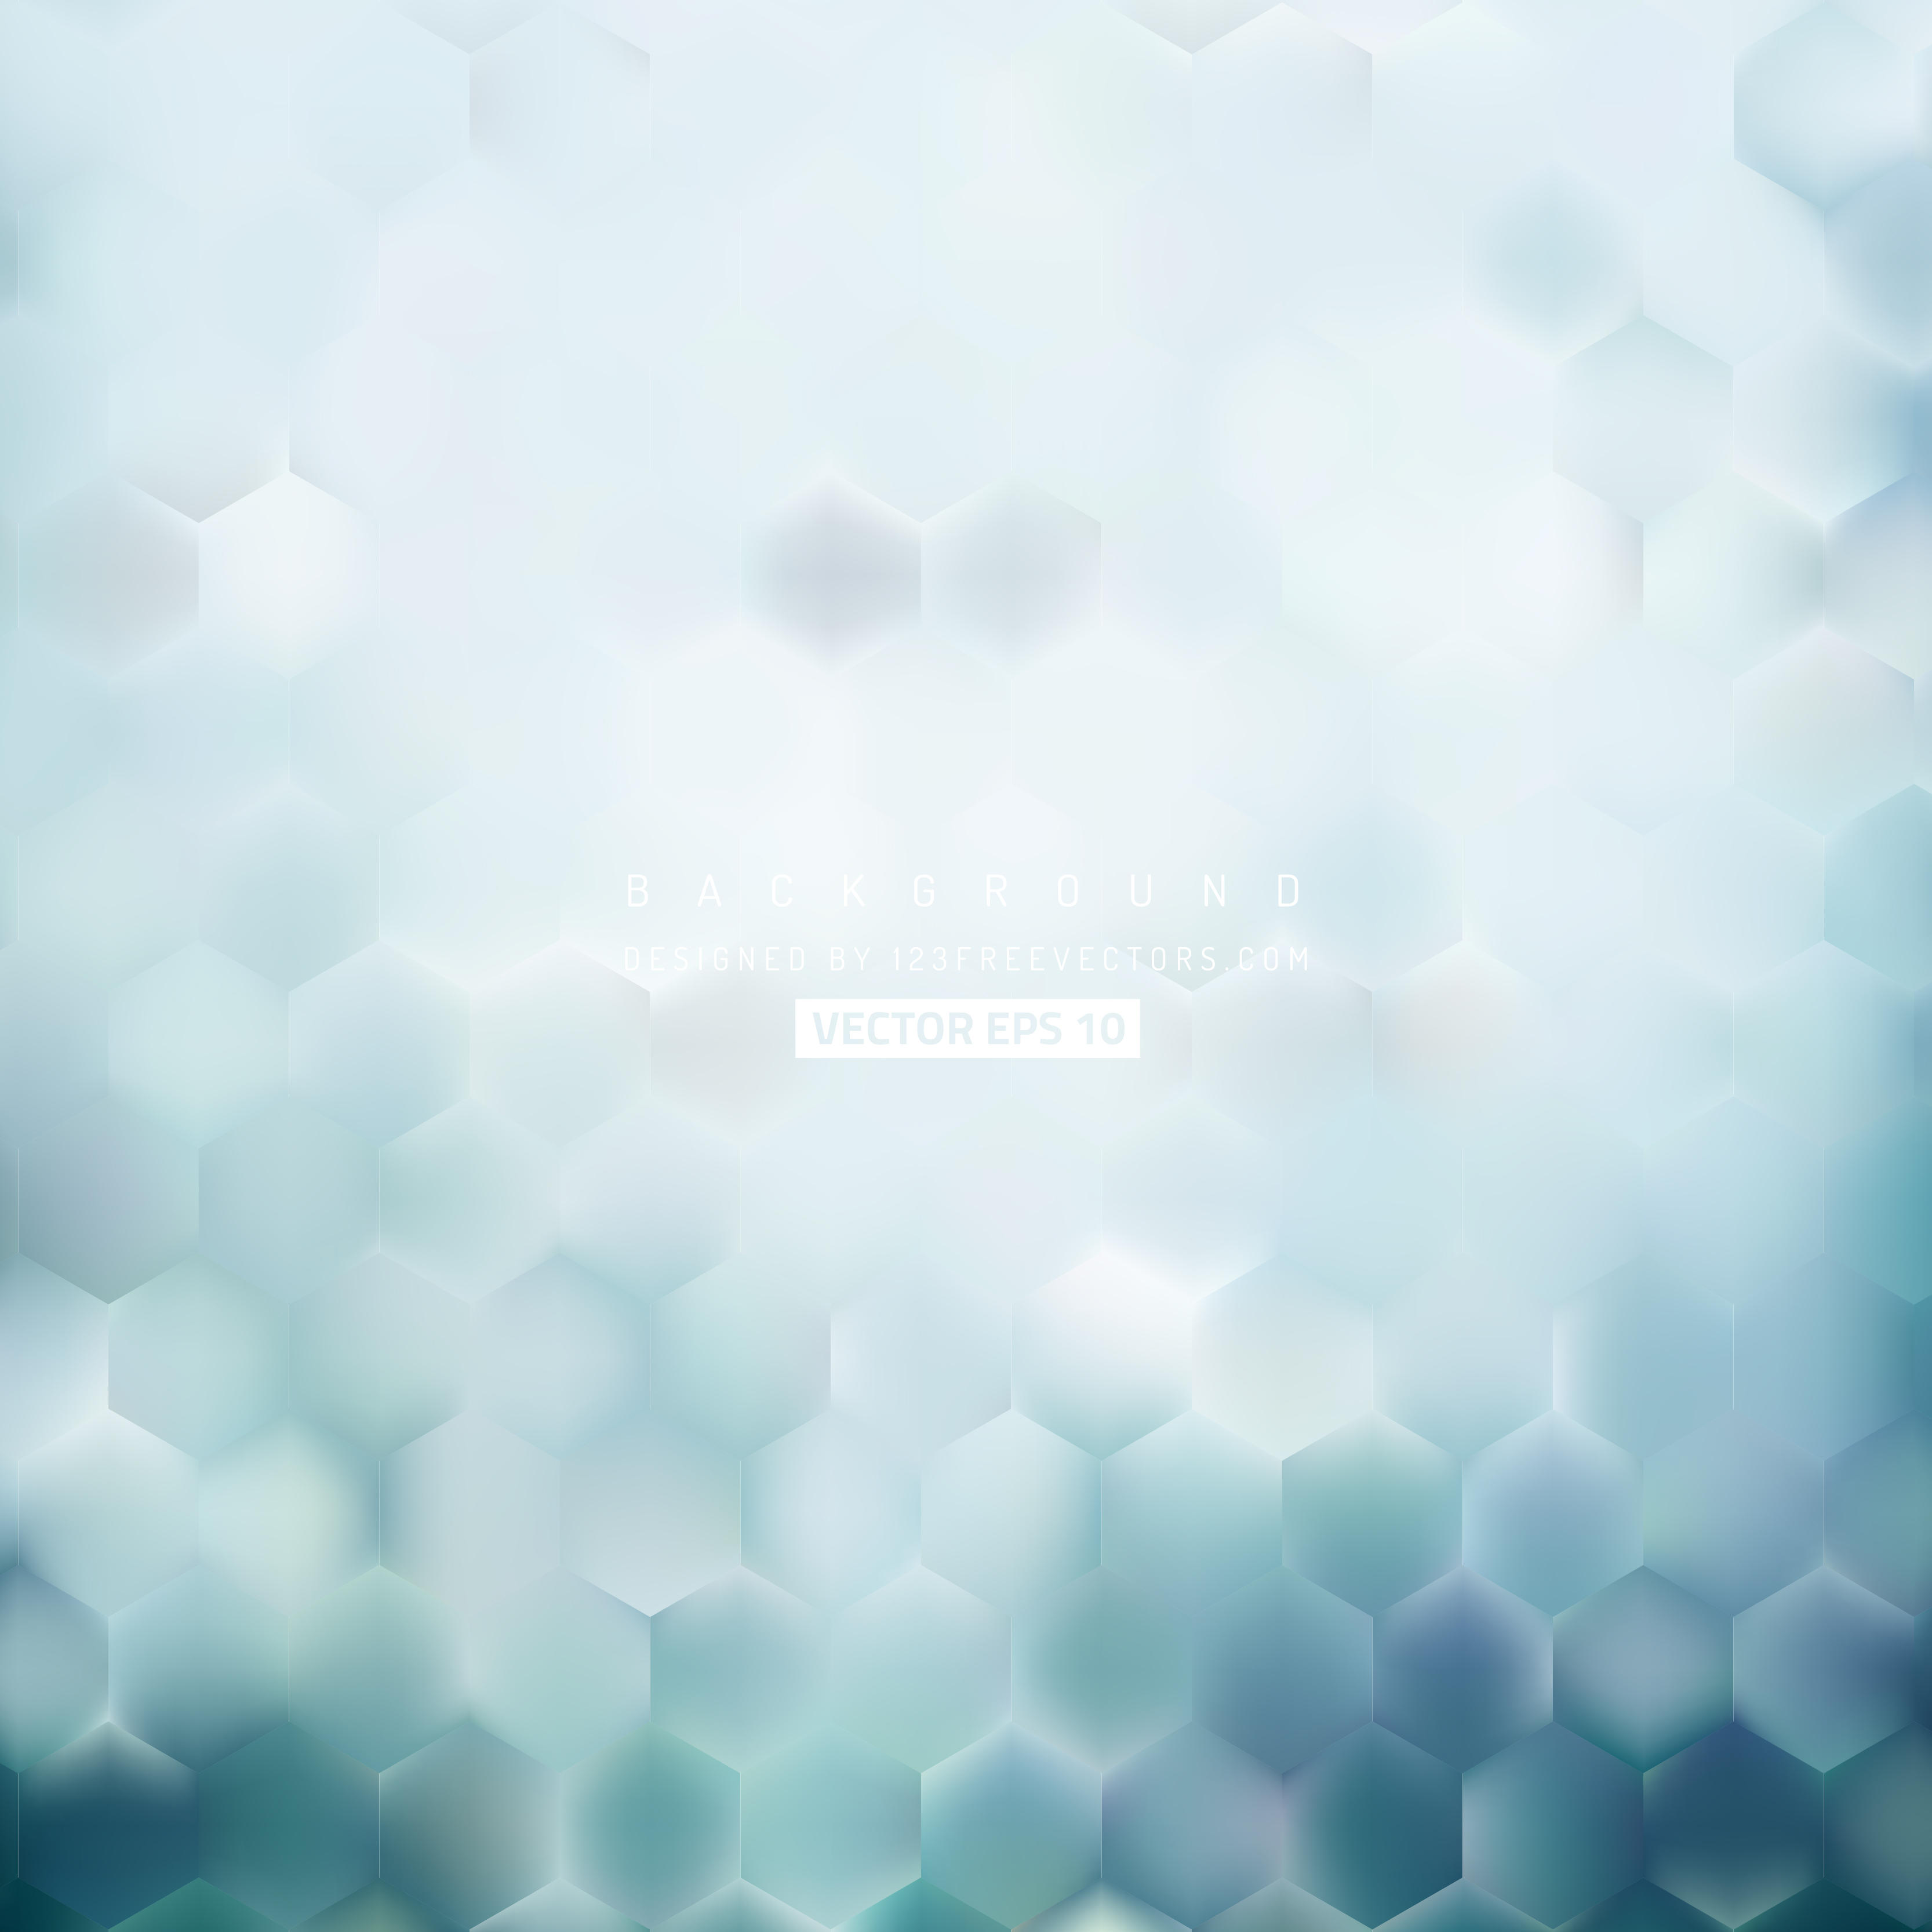 Abstract Light Blue Hexagon Pattern Background Design | 123Freevectors